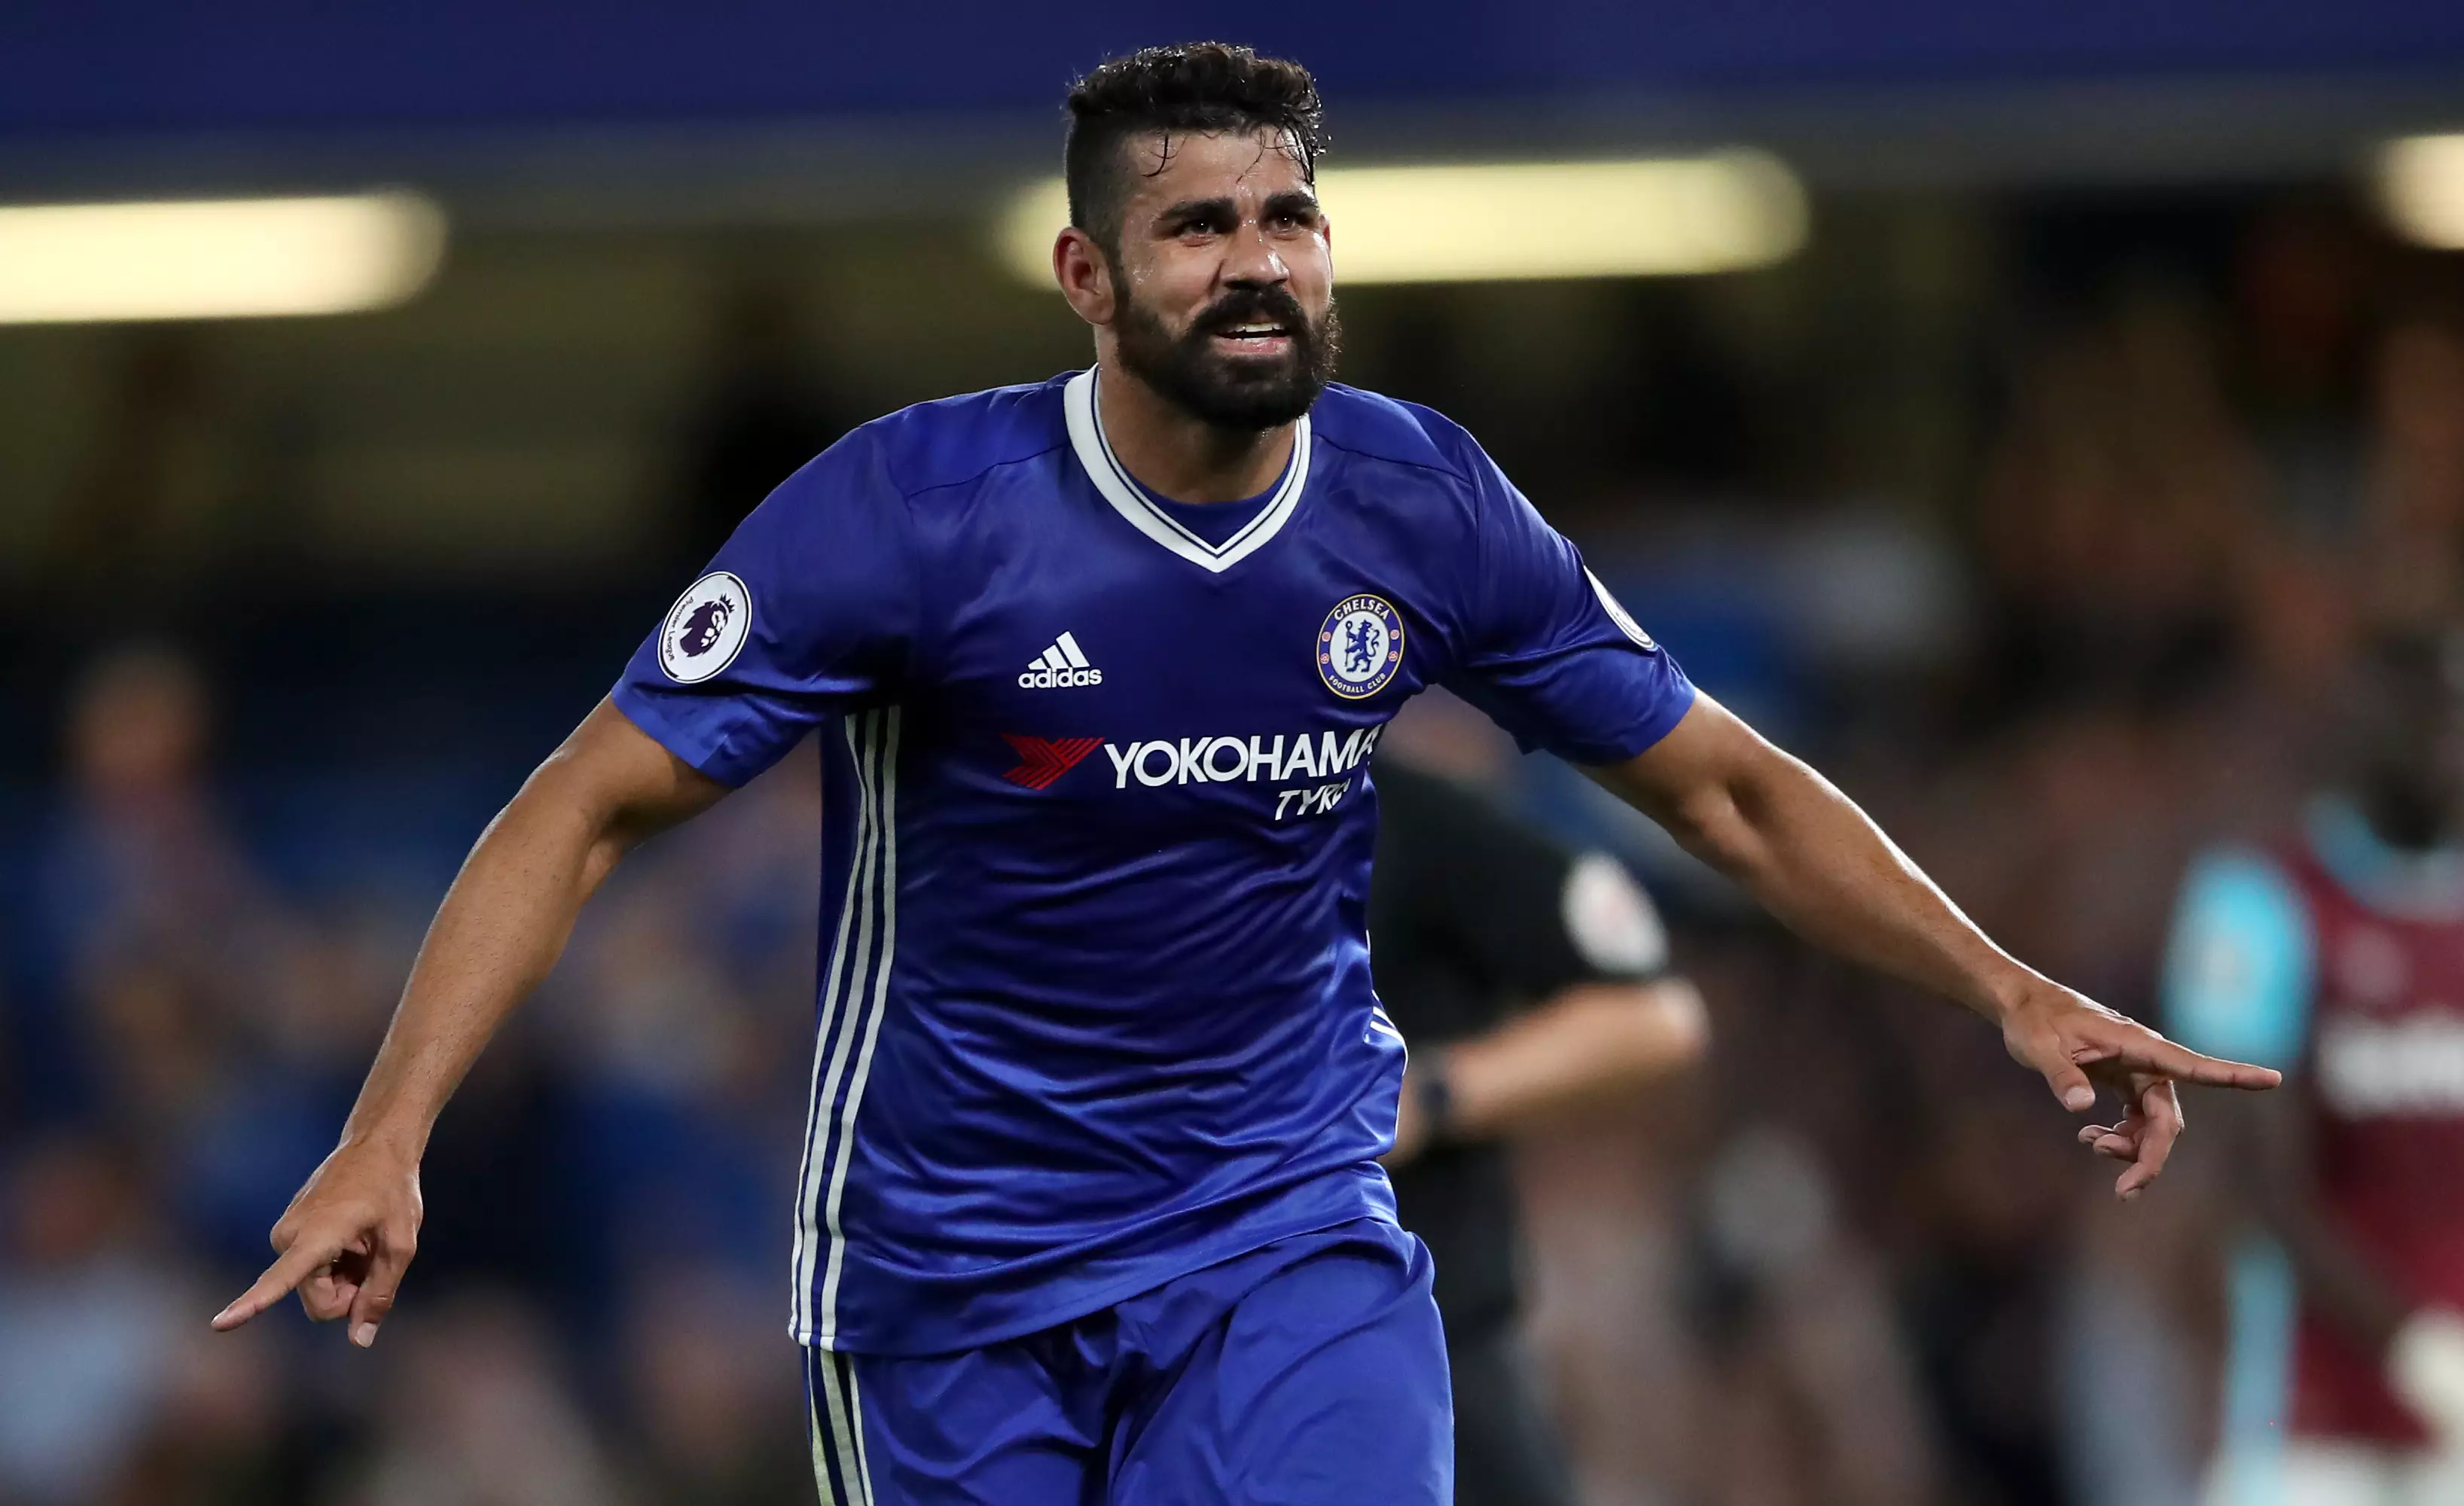 Diego Costa's Brother Is The Striker's Doppelganger